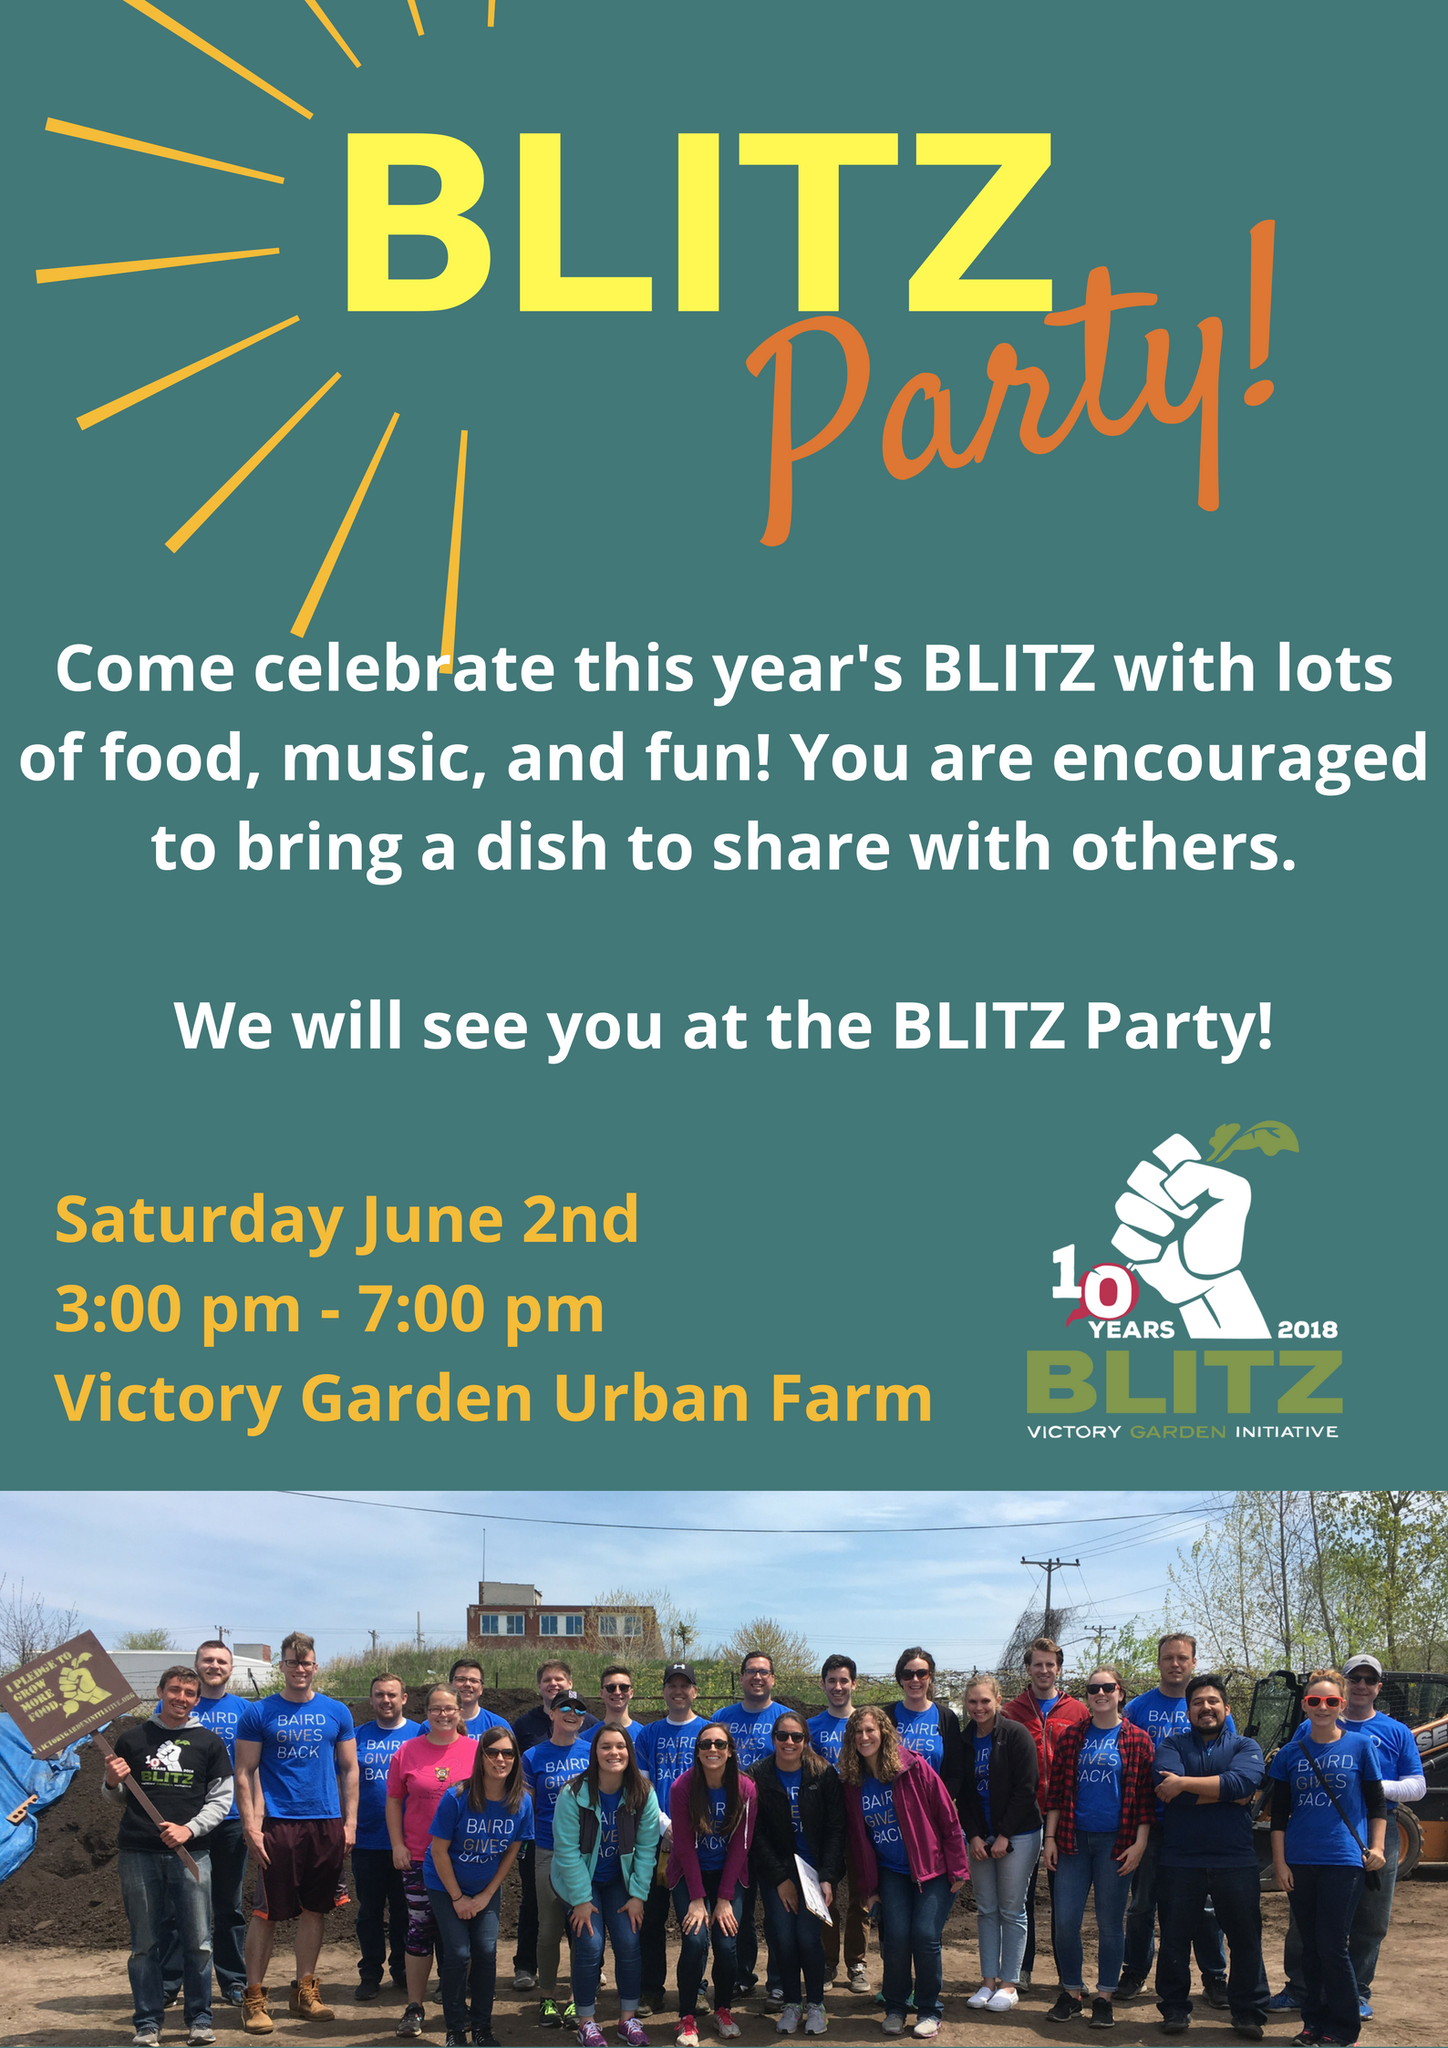 Victory Garden Initiative On Twitter This Saturday Is Our Blitz